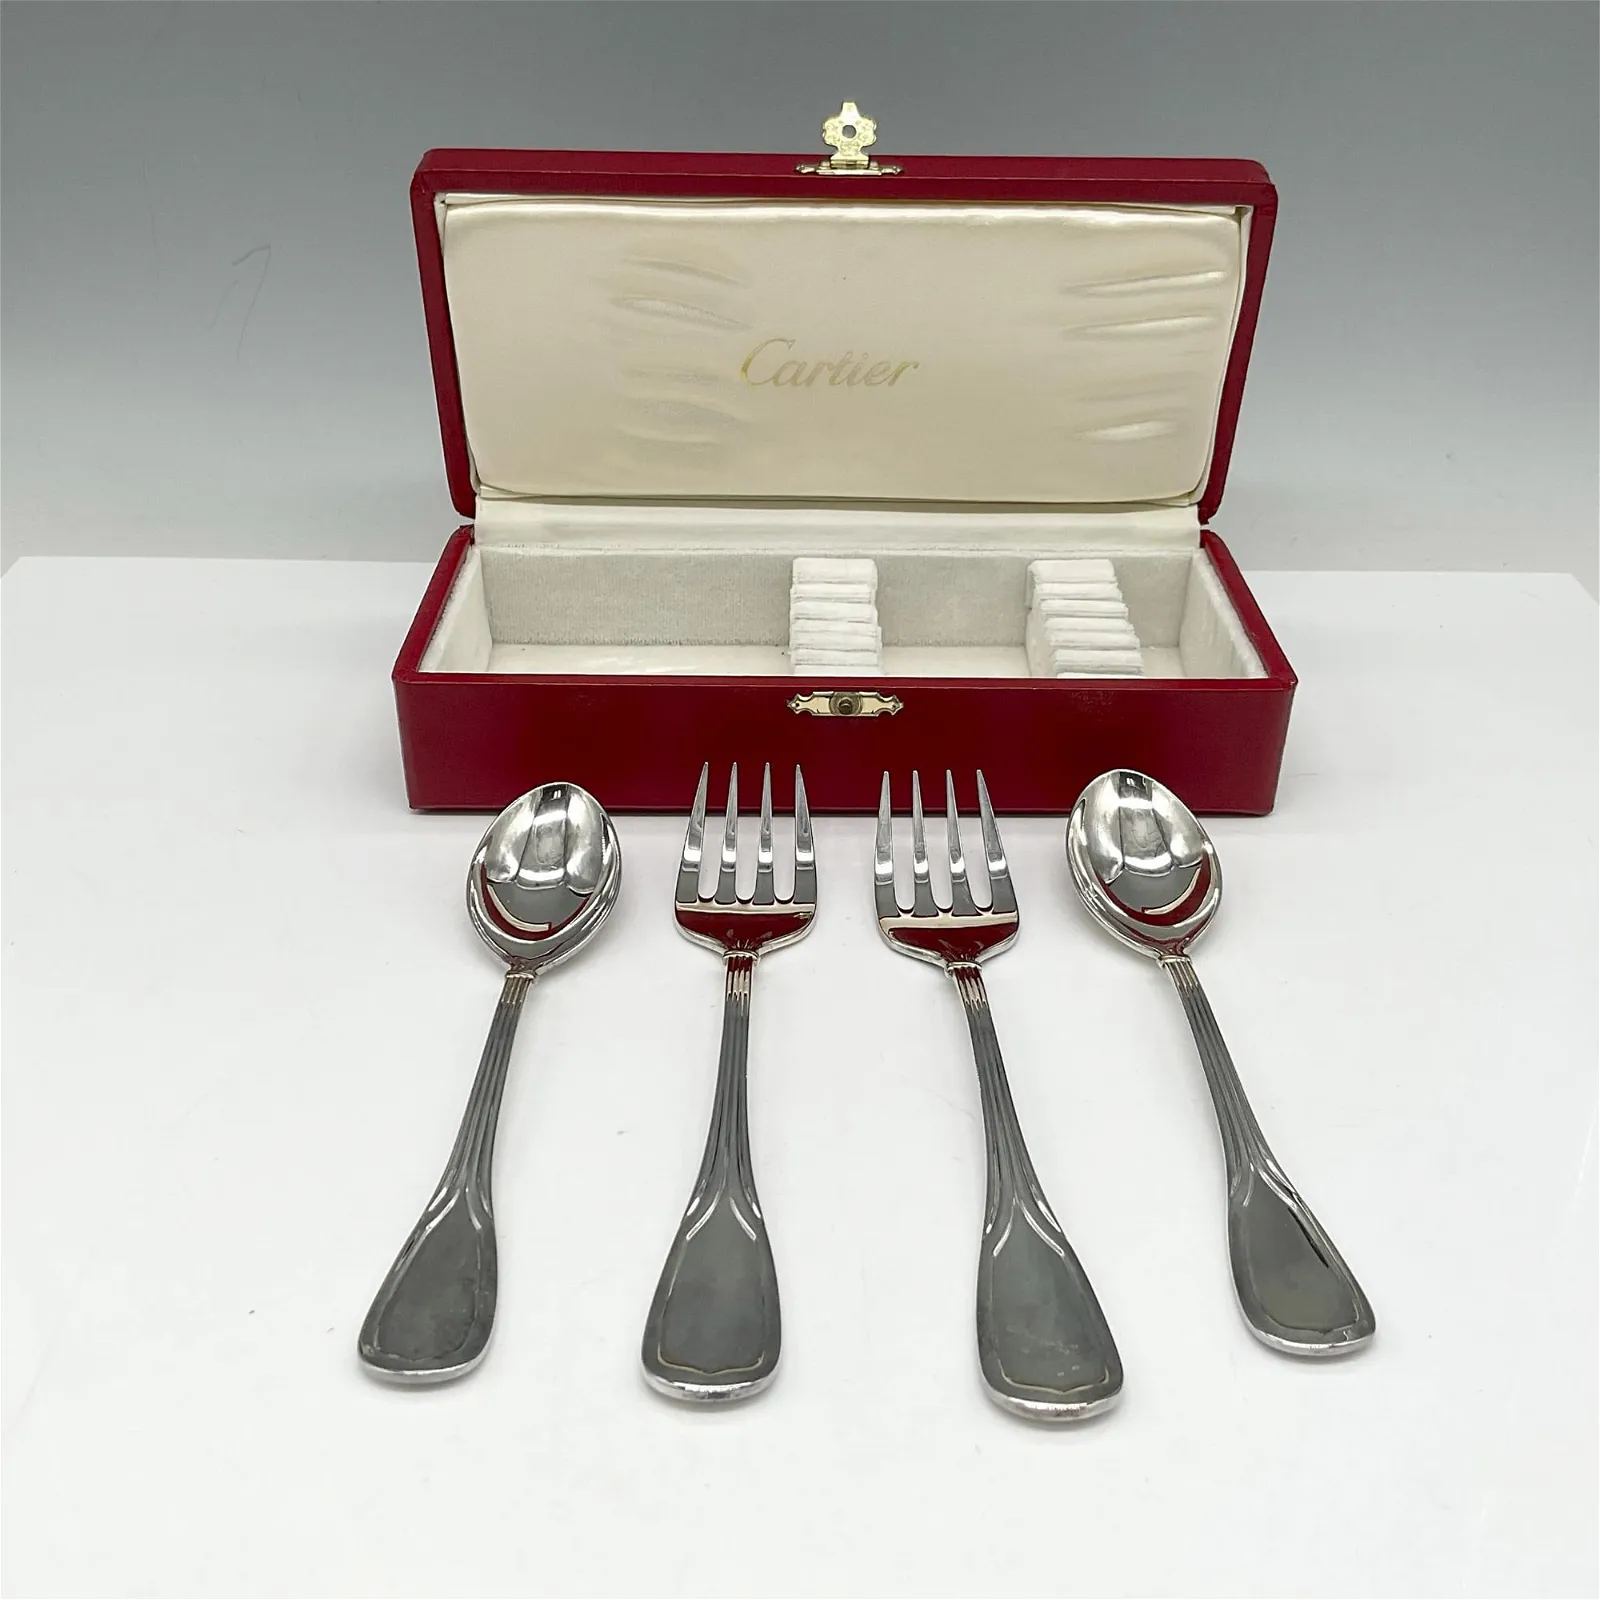 Cartier Sterling Silver Spoon and Fork Set, 4 pieces